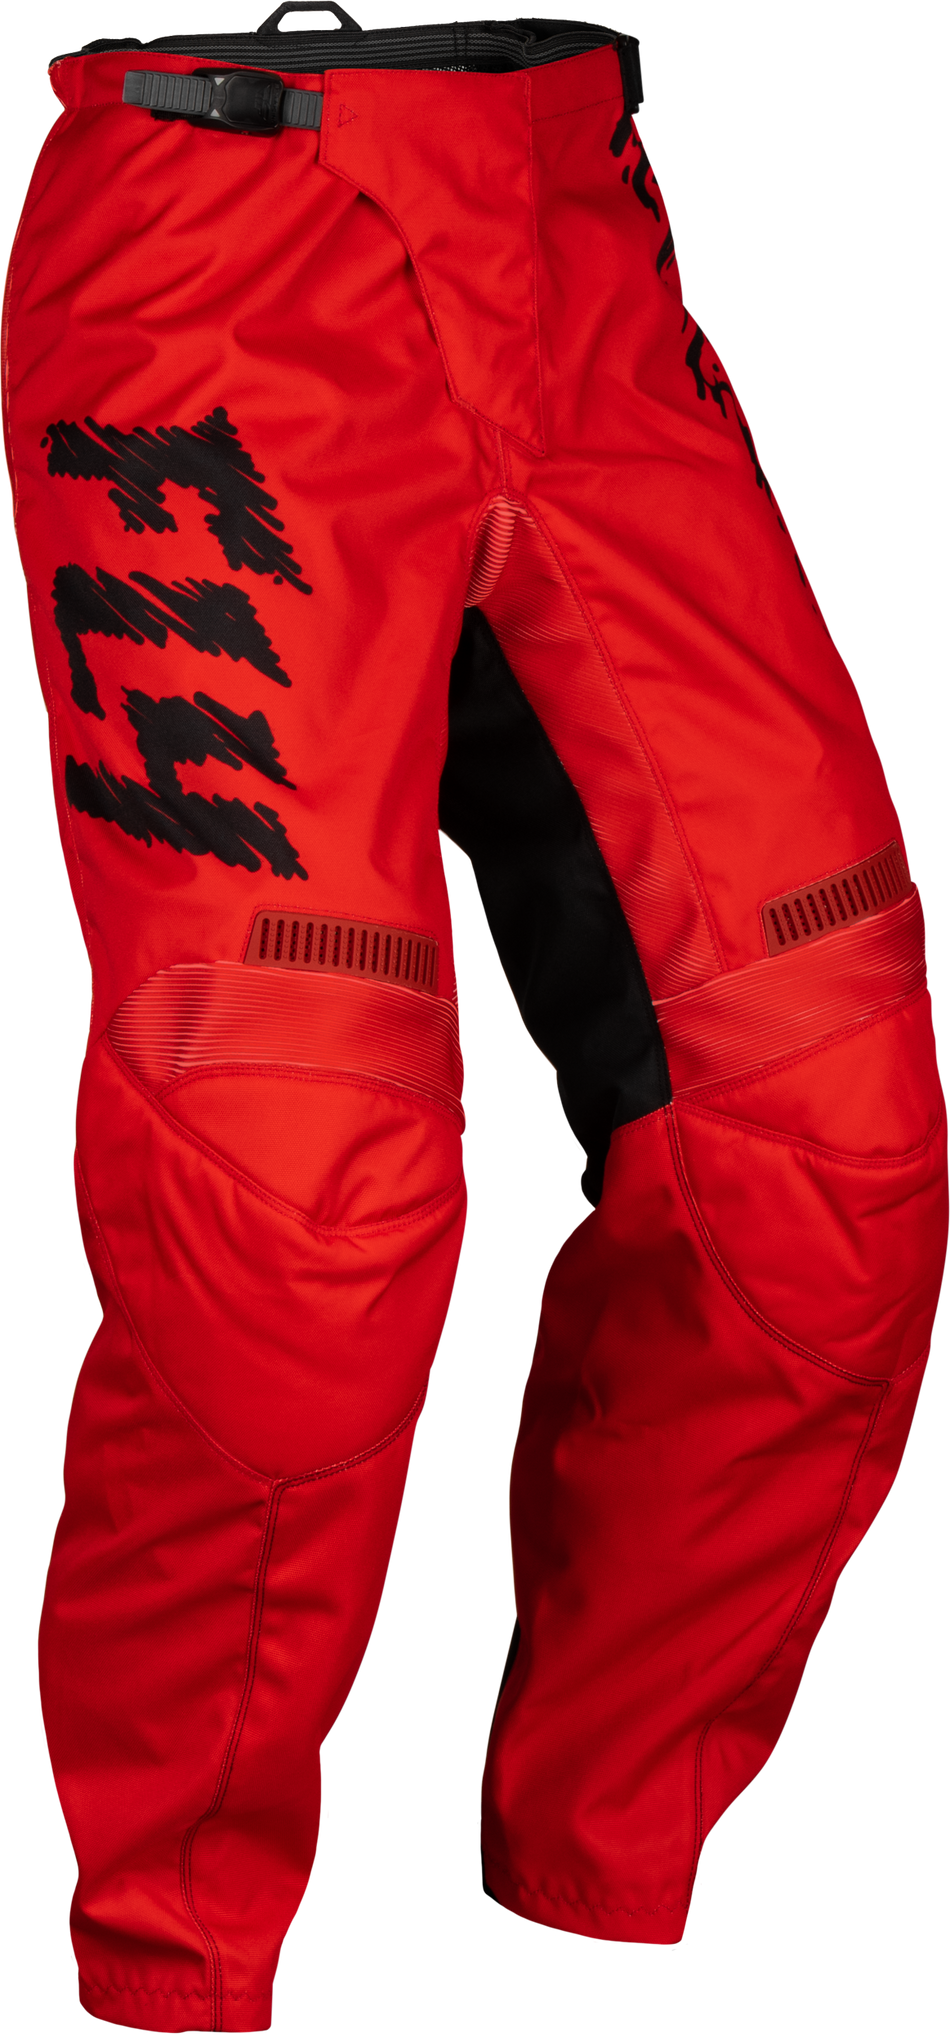 FLY RACING Youth F-16 Pants Red/Black/Grey Sz 20 377-23220